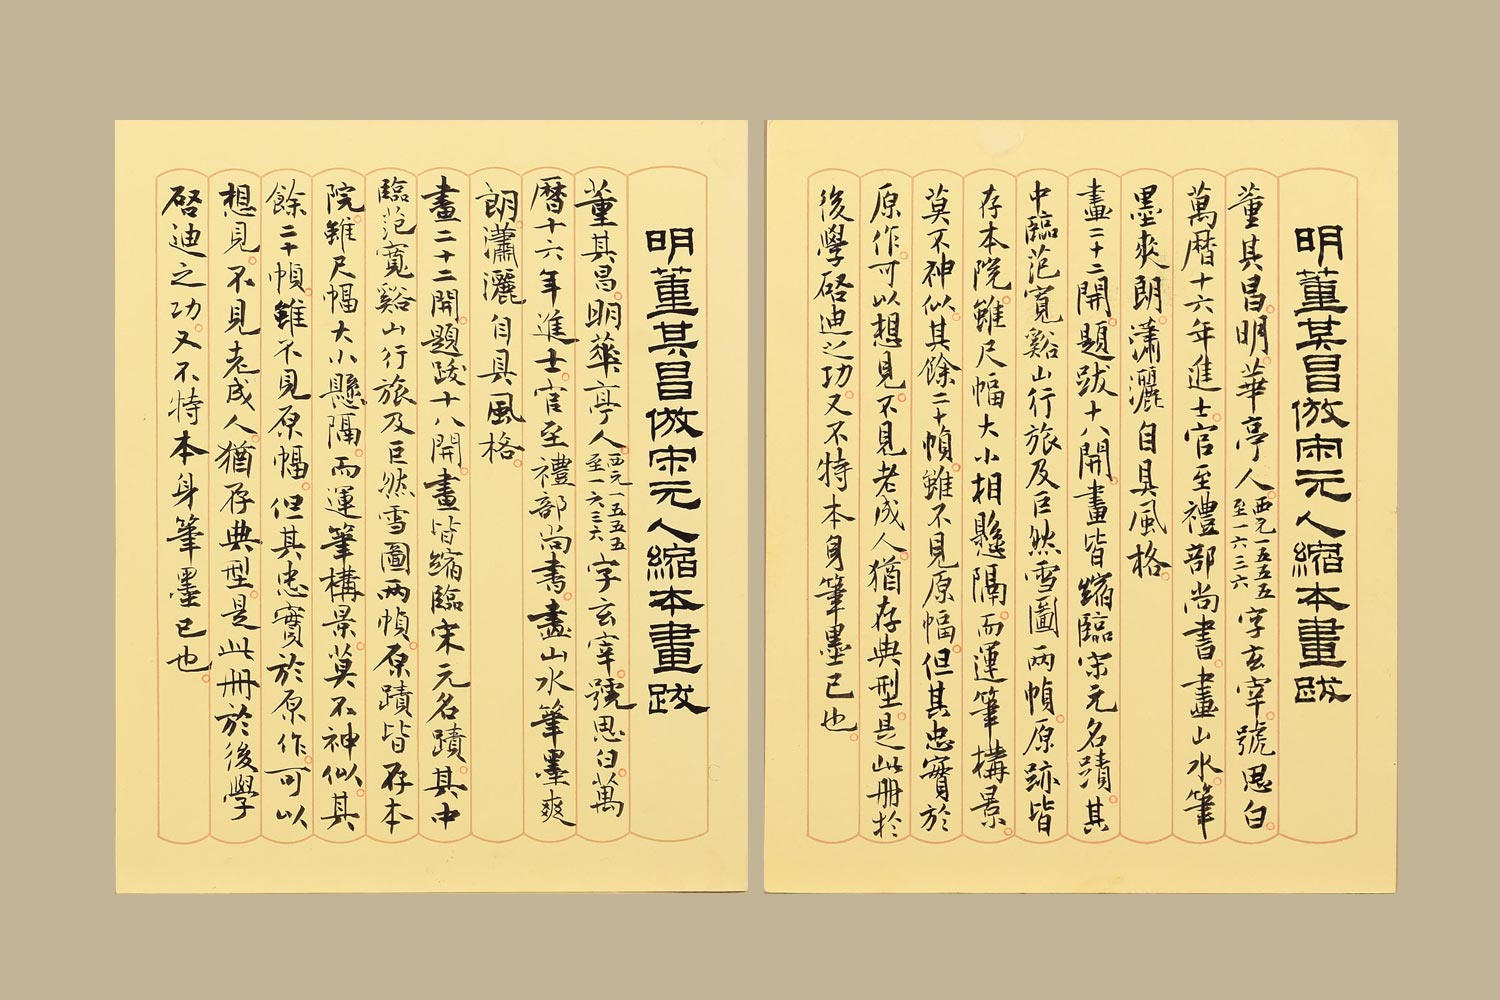 From "Album of Reduced Copies in Imitation of Song and Yuan Paintings with Colophons"